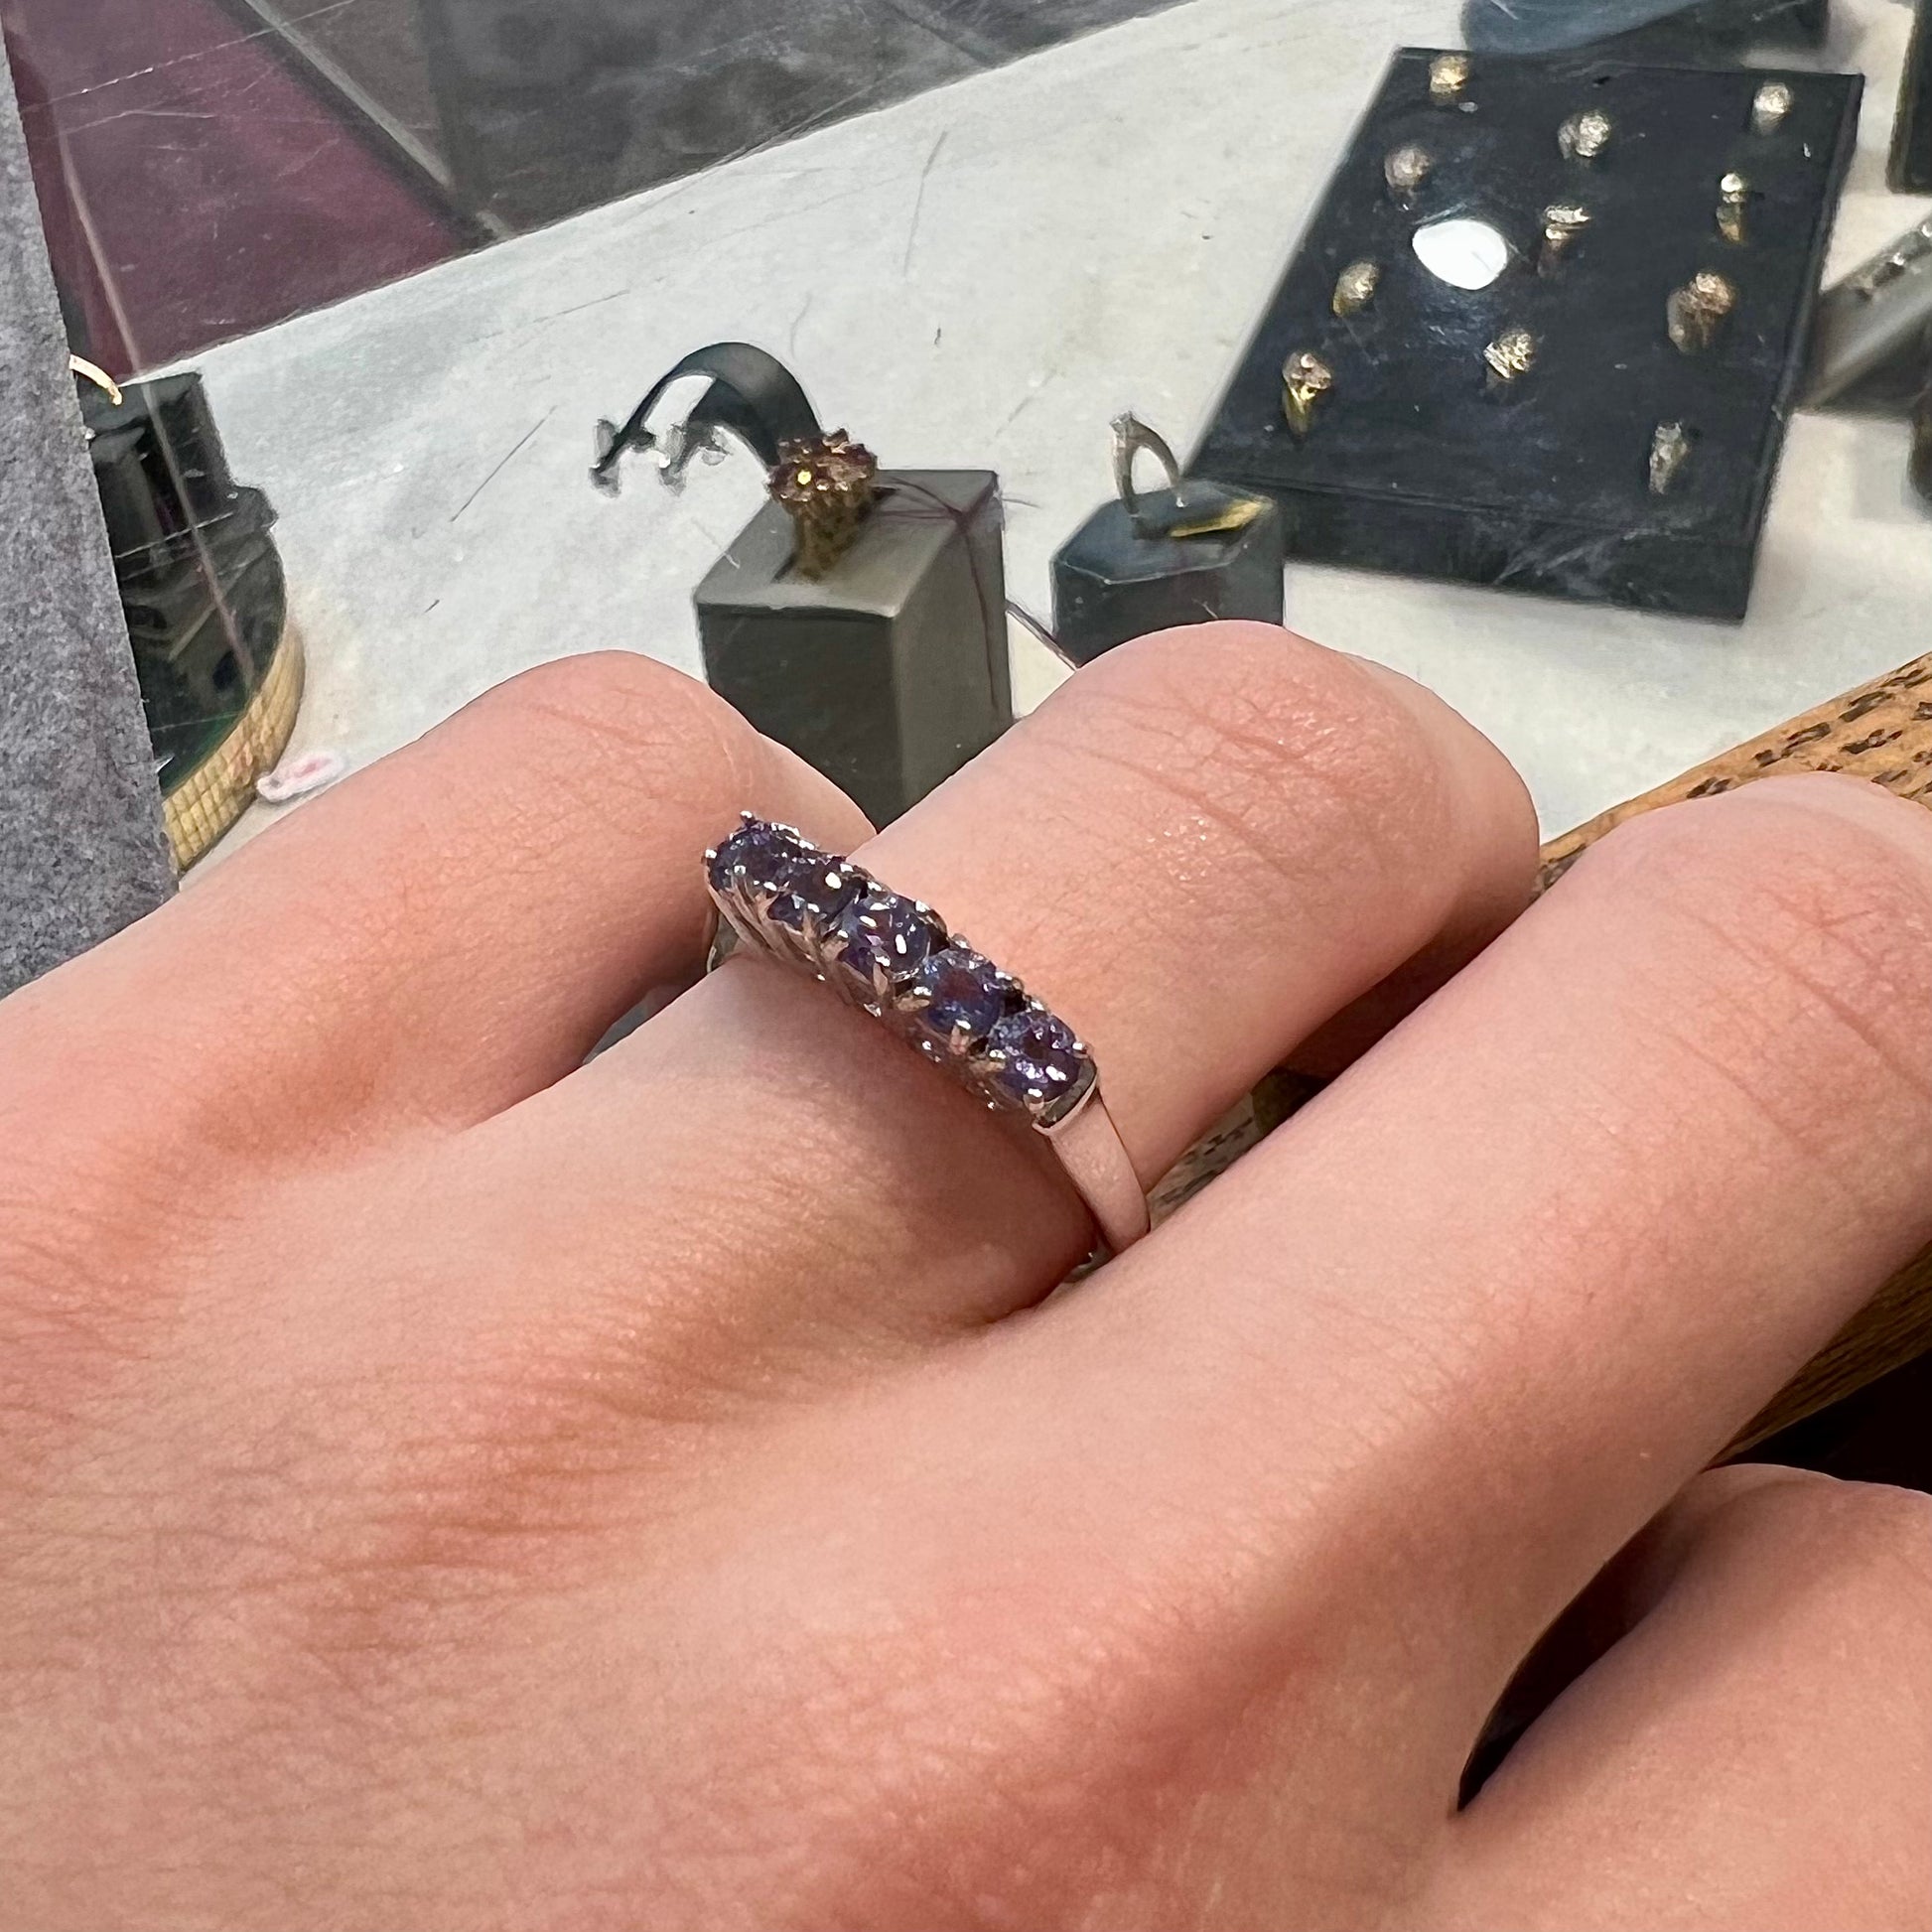 A sterling silver stackable ring set with five Standard Round Brilliant Cut tanzanite stones.